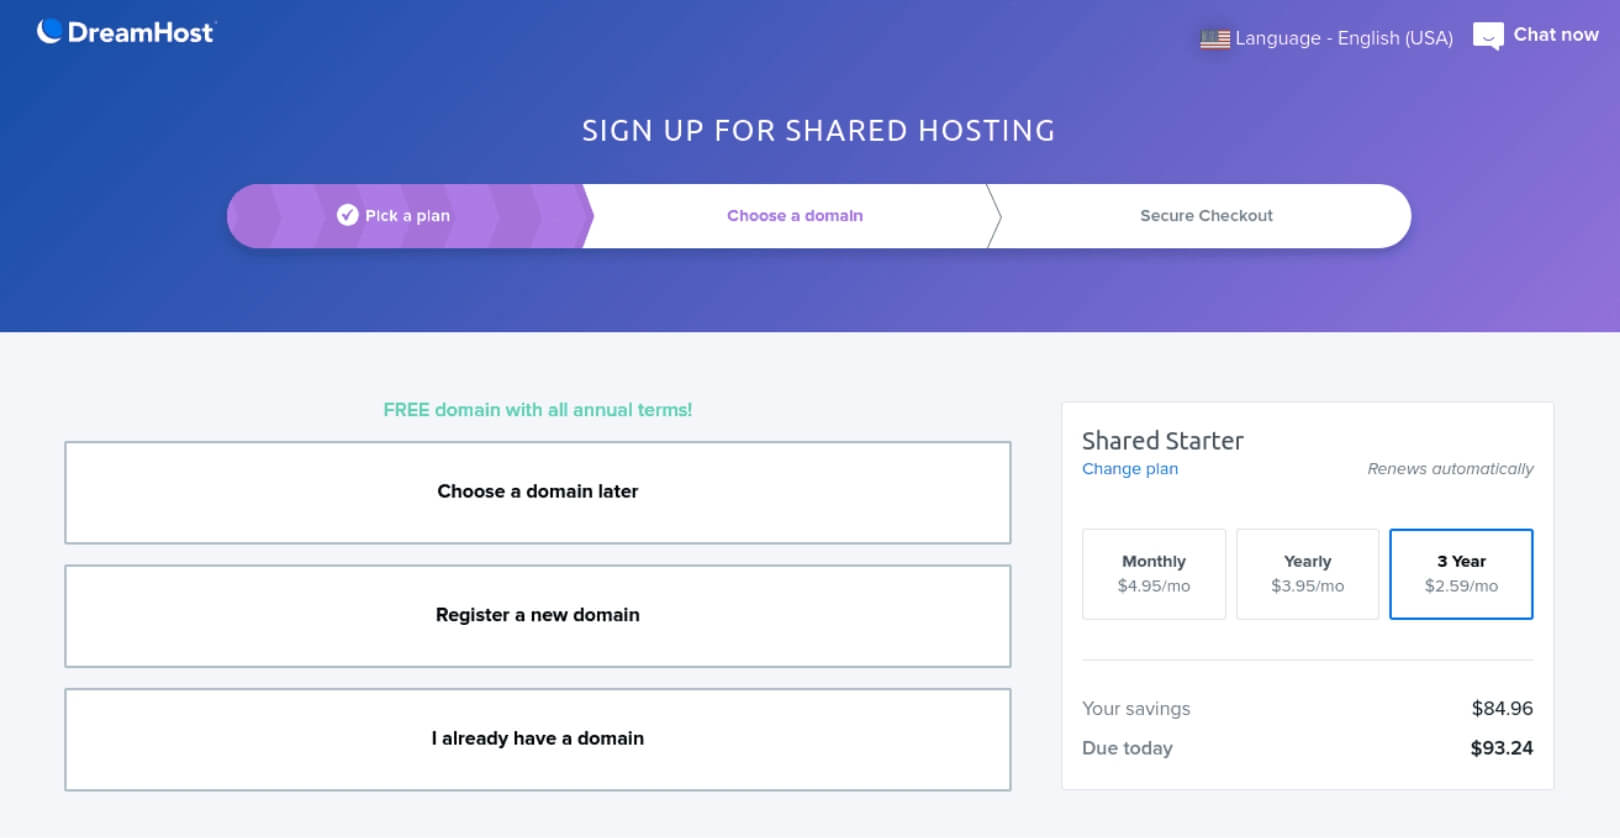 dreamhost-sign-up-for-shared-hasting